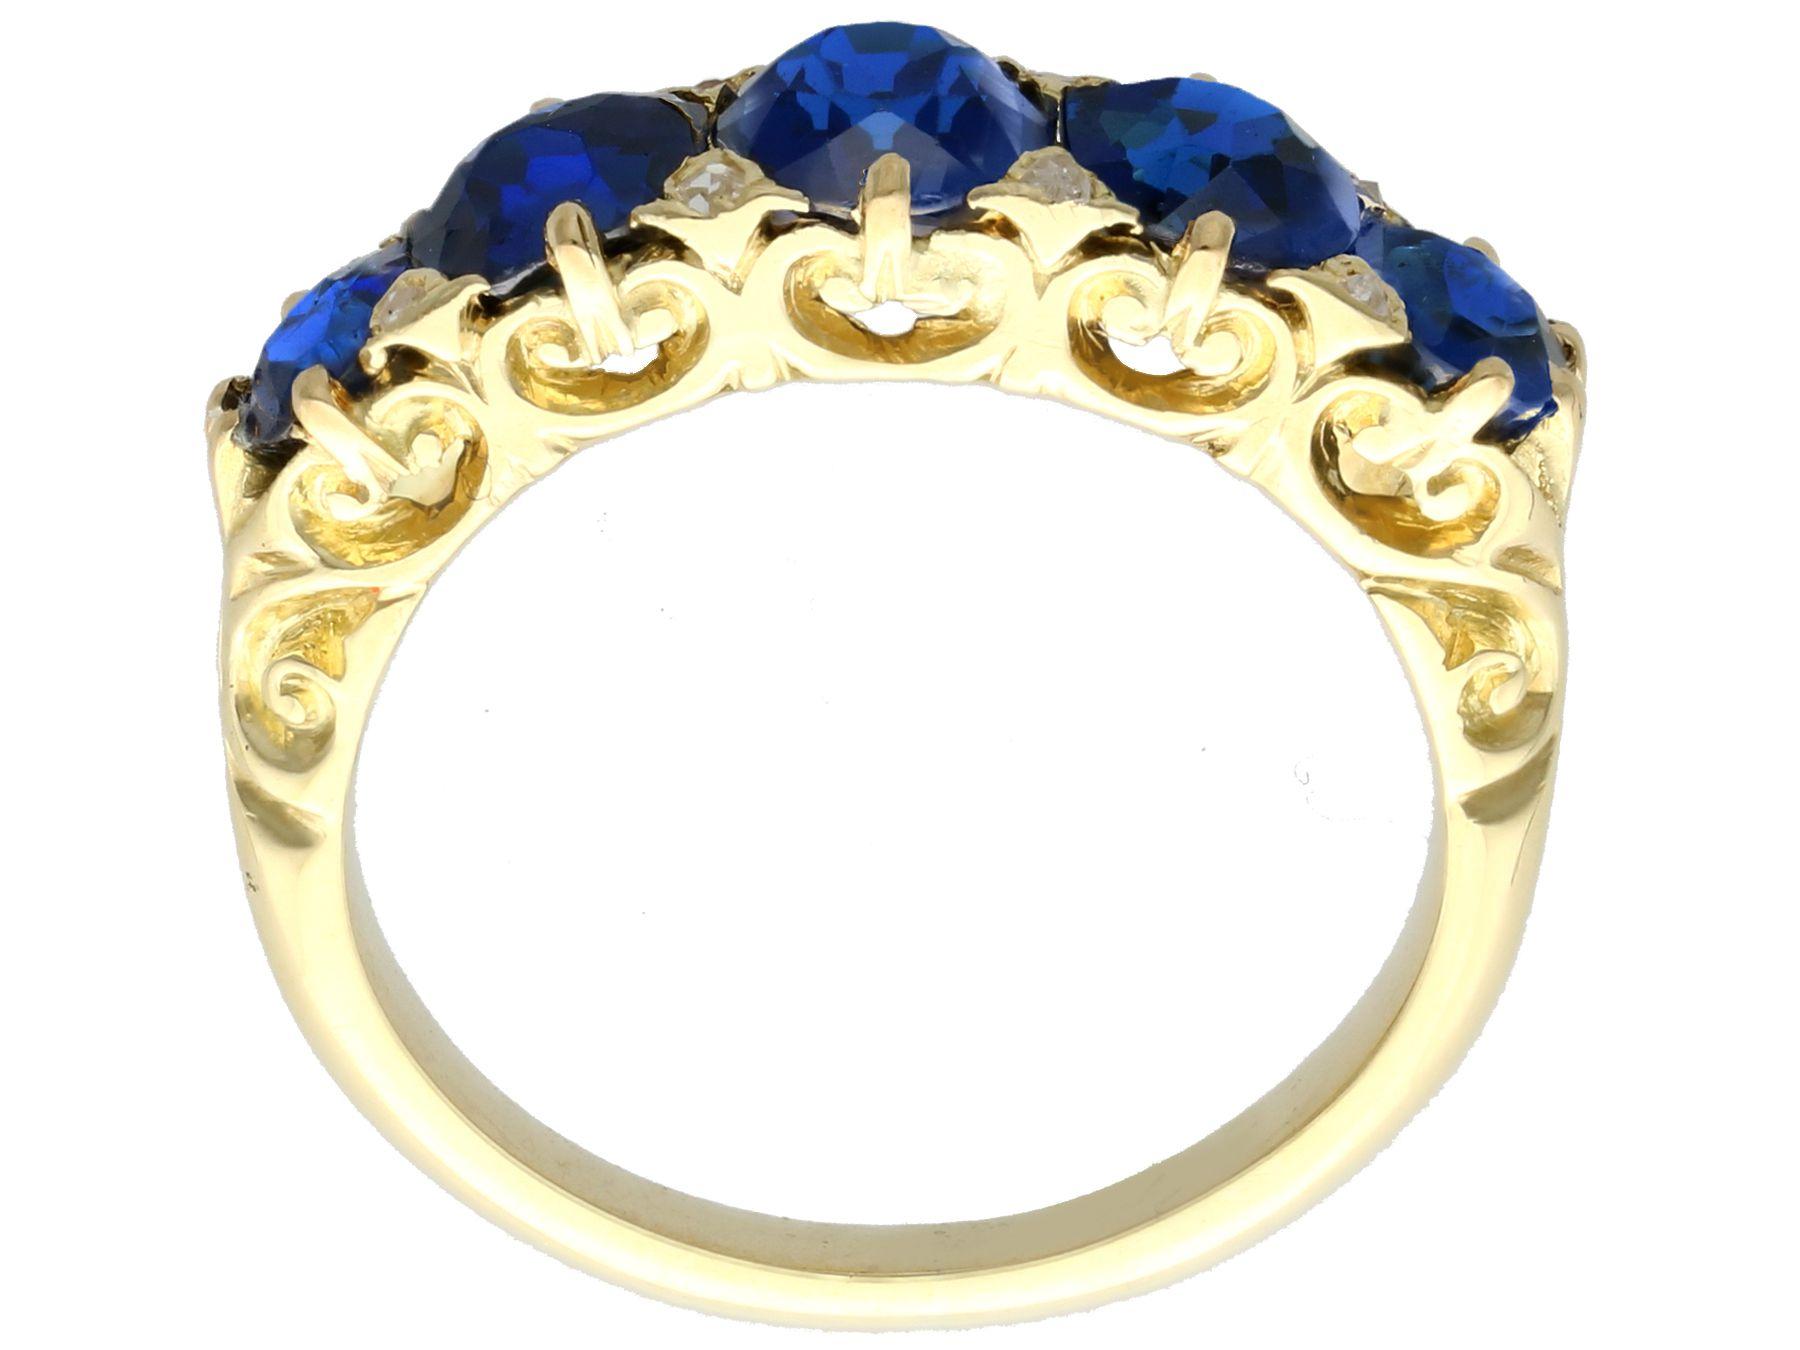 Antique 3.15 Carat Basaltic Sapphire and Diamond Five Stone Ring in Yellow Gold For Sale 1